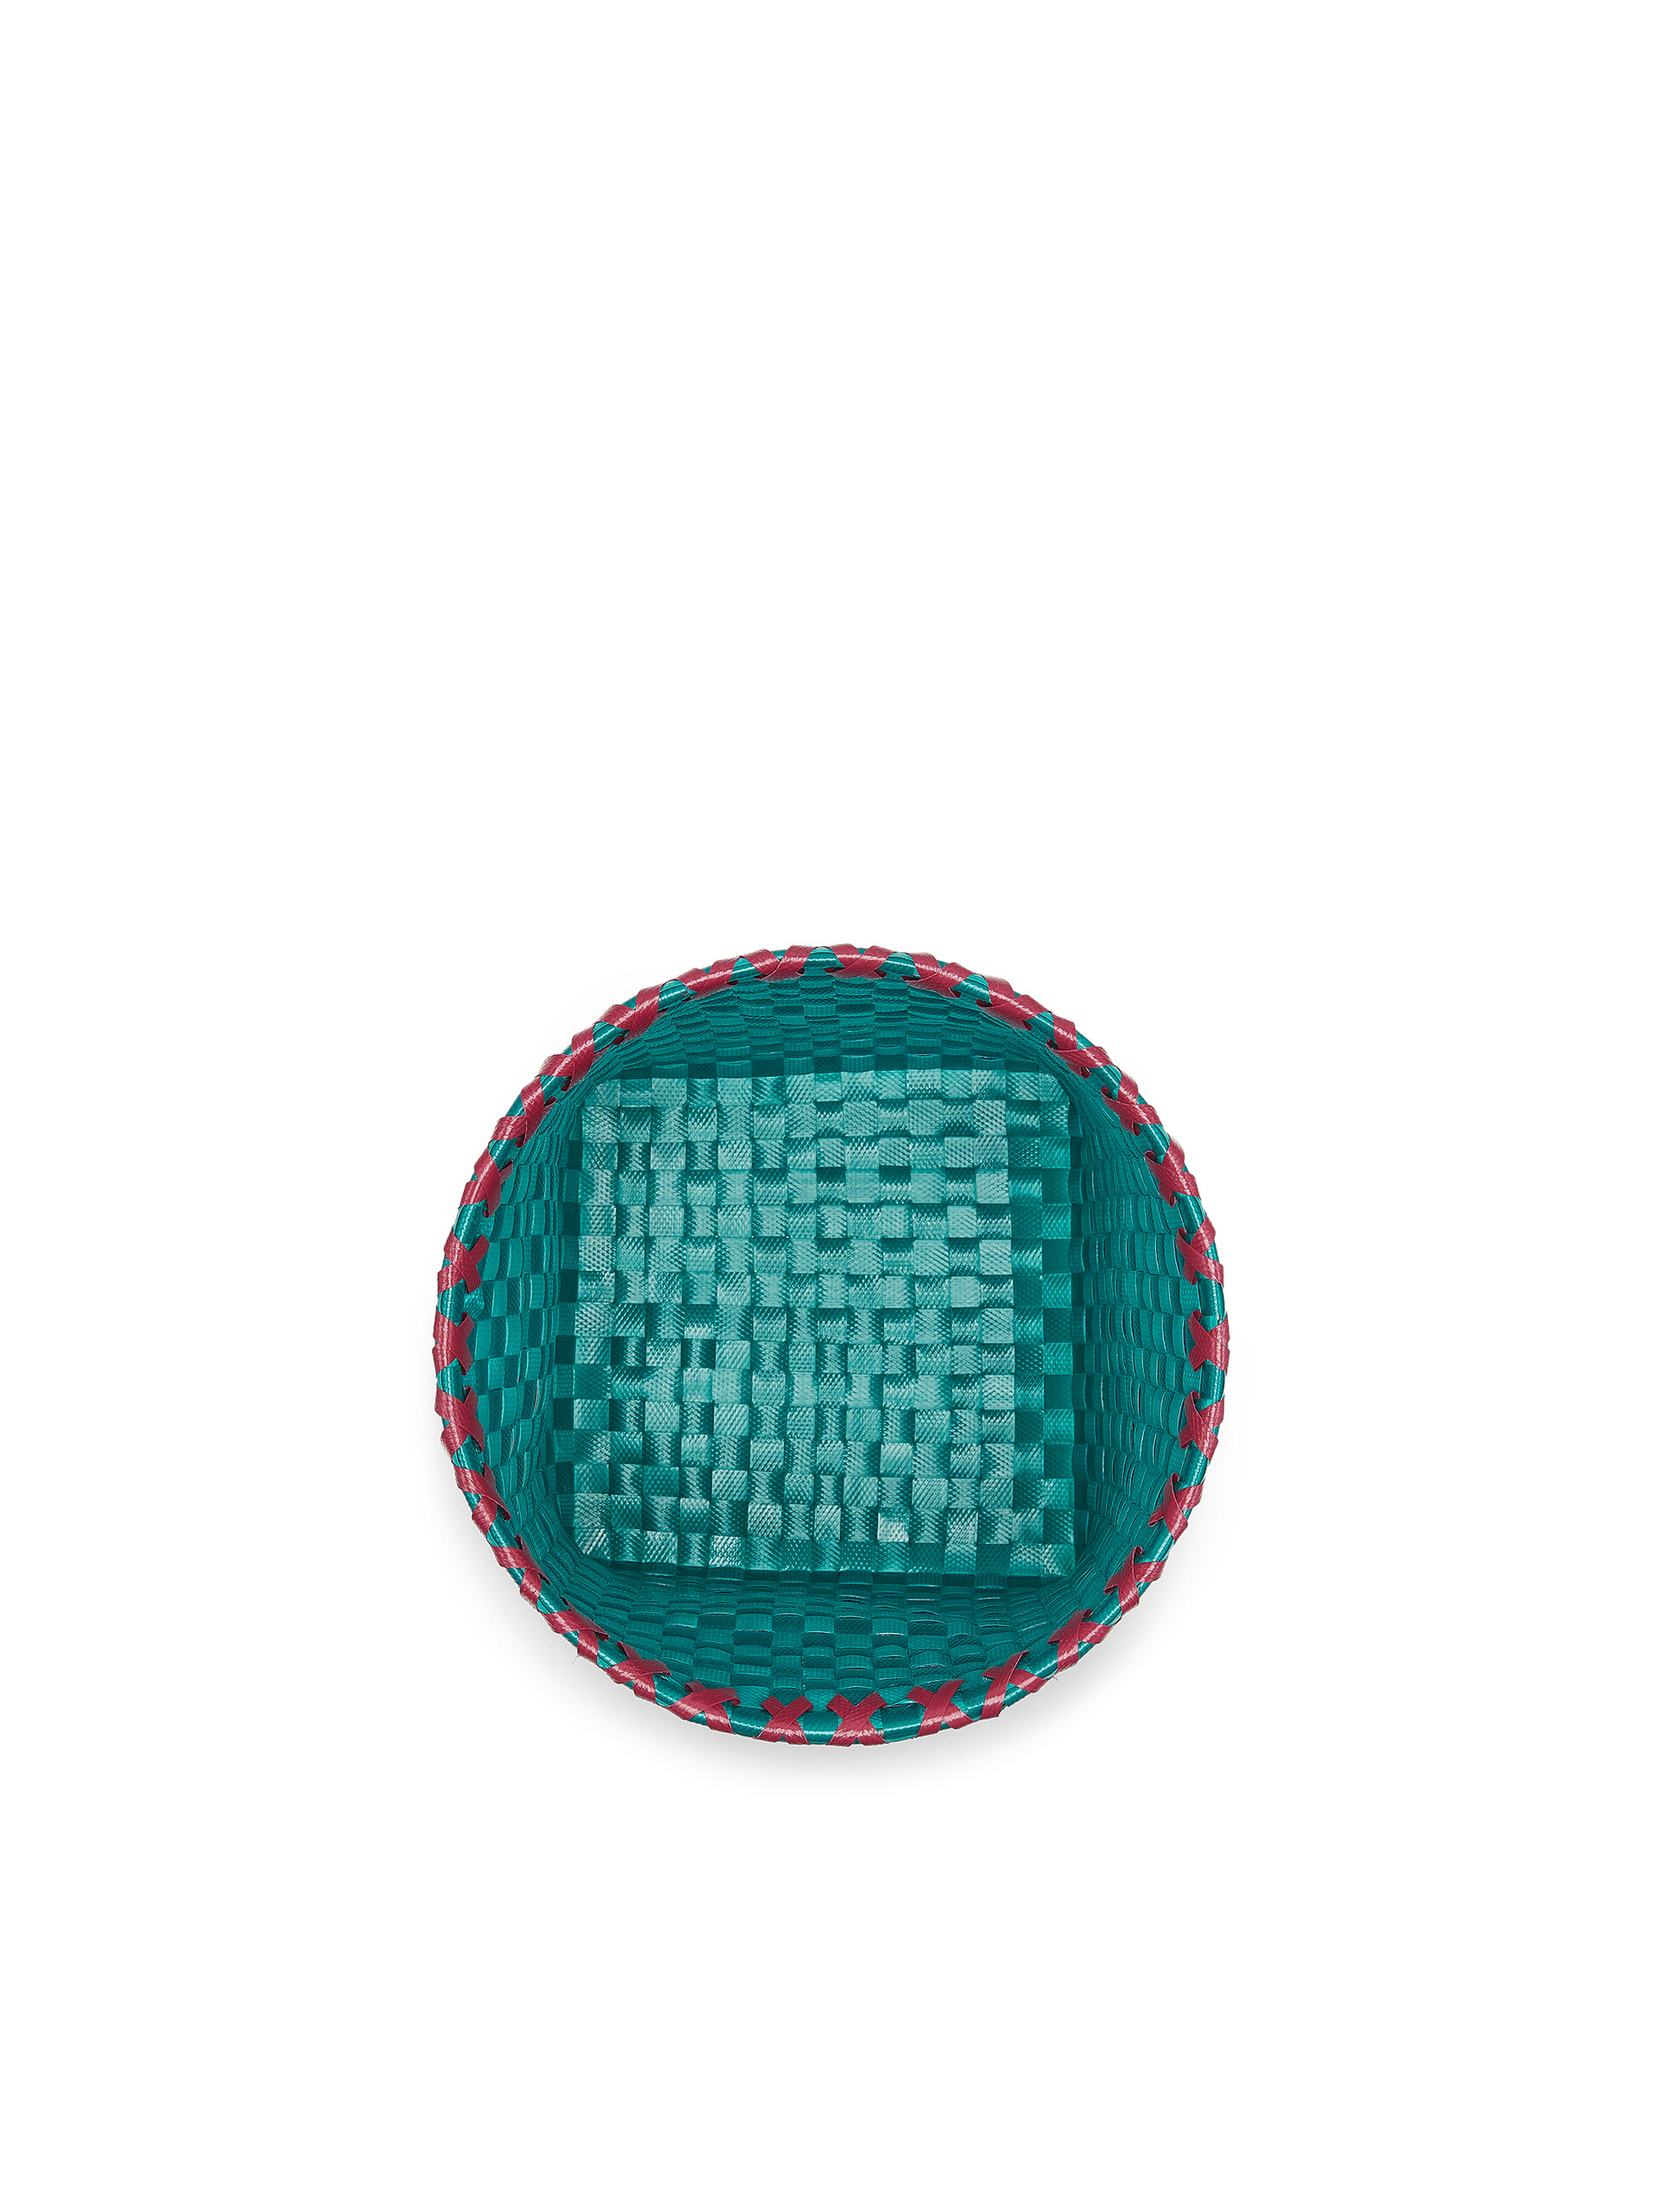 MARNI MARKET basket in pale blue blue and burgundy woven PVC - Home Accessories - Image 4